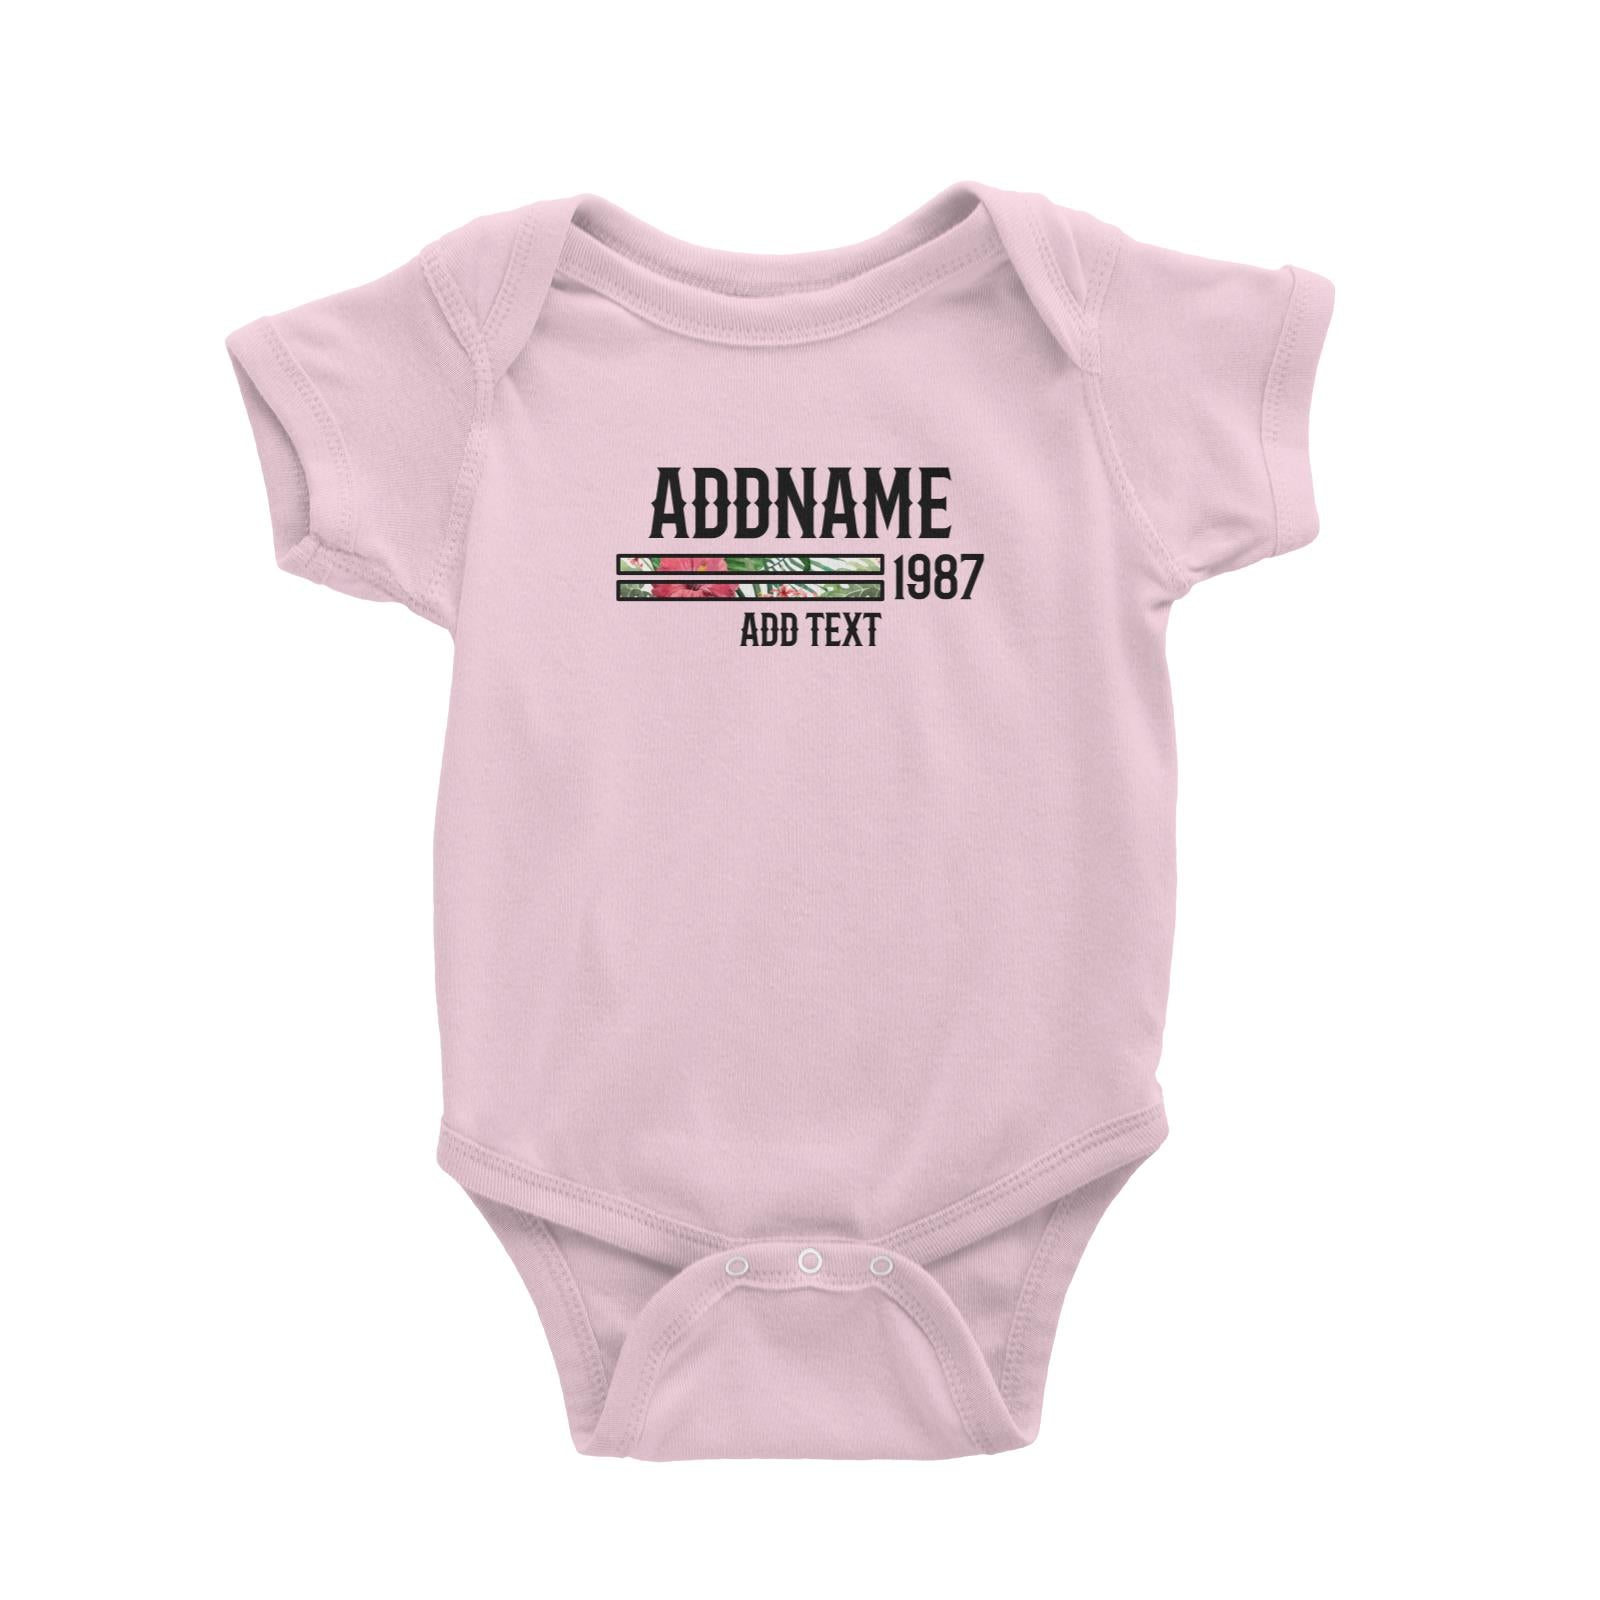 Bunga Raya Tropical Leaves Bars Personalizable with Name Year and Text Baby Romper